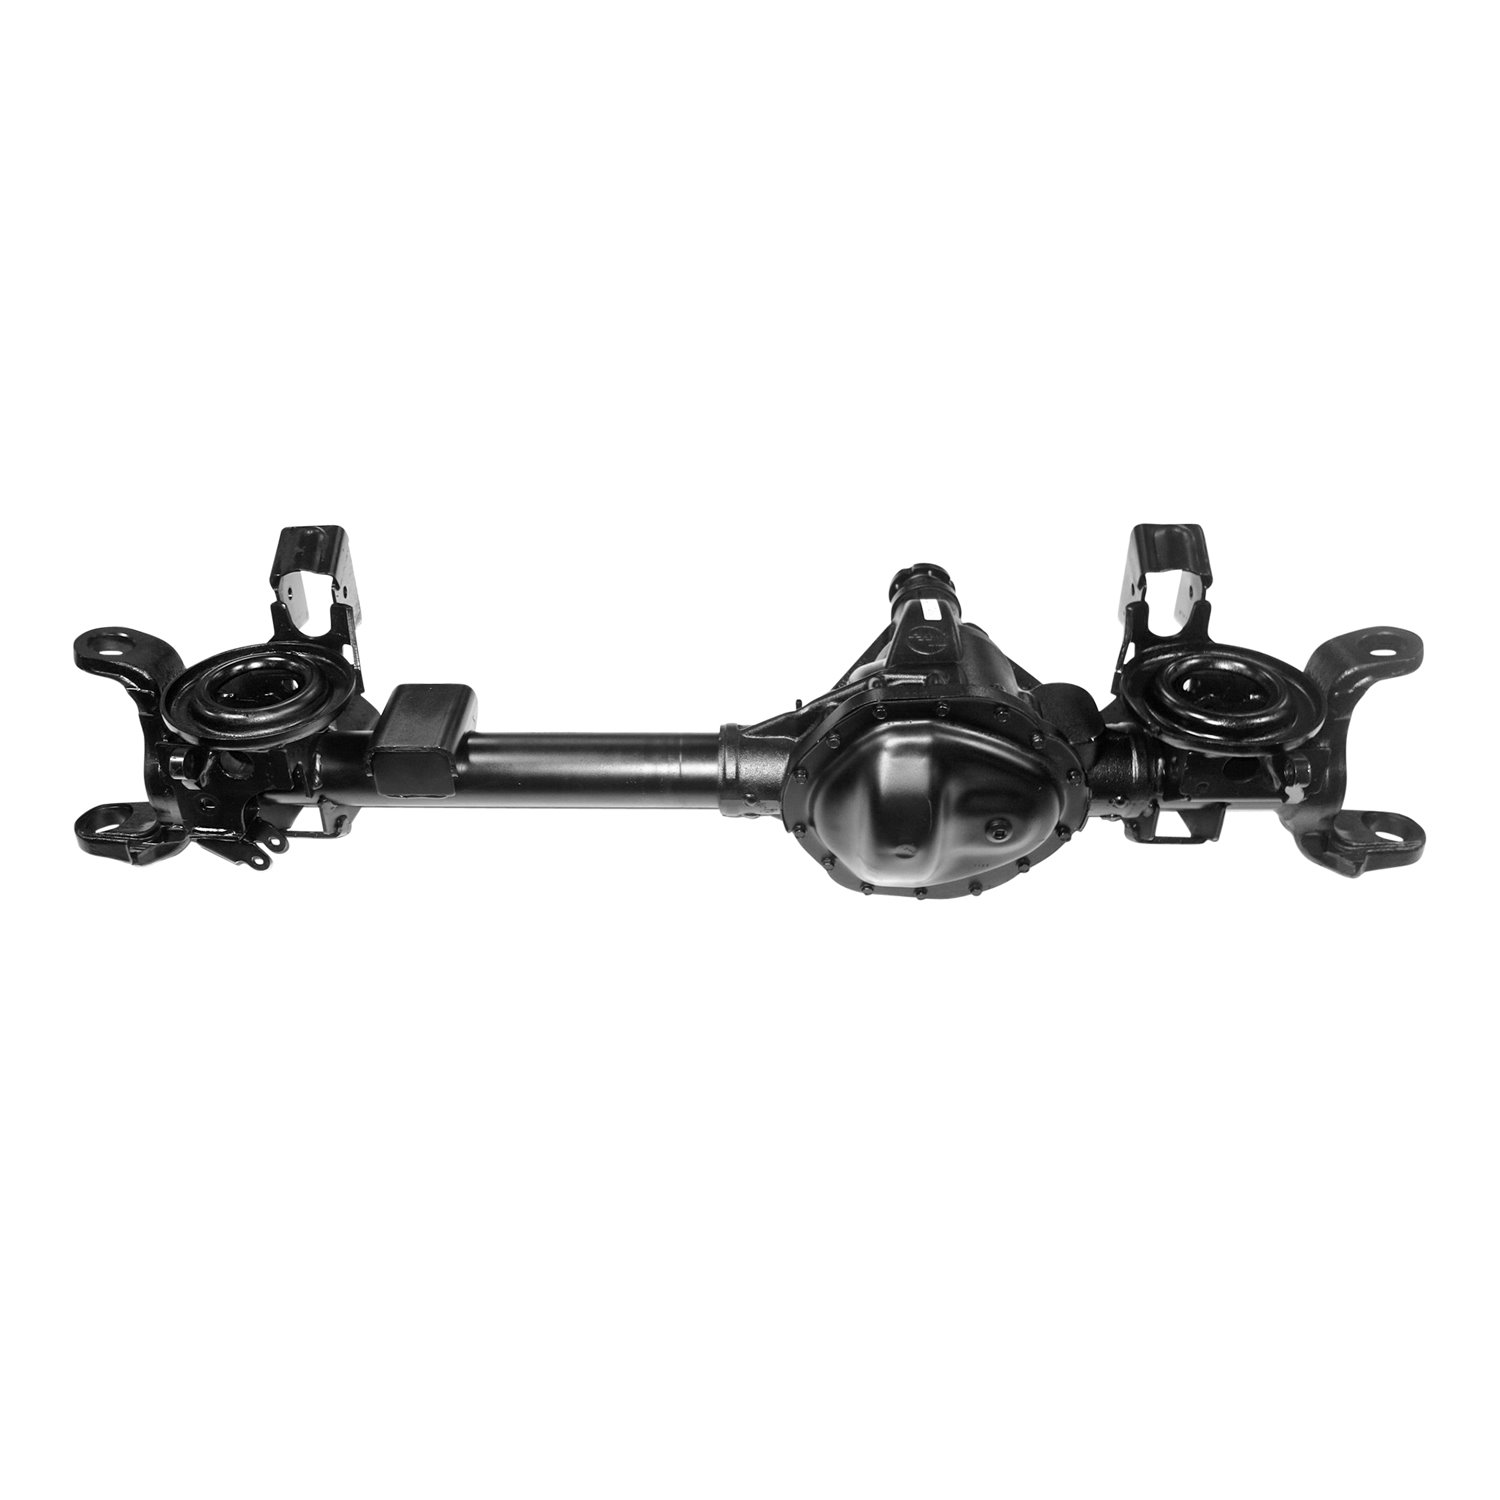 Remanufactured Front Axle Assy 9.25" 2012-2013 Ram 2500 & 3500 3.73